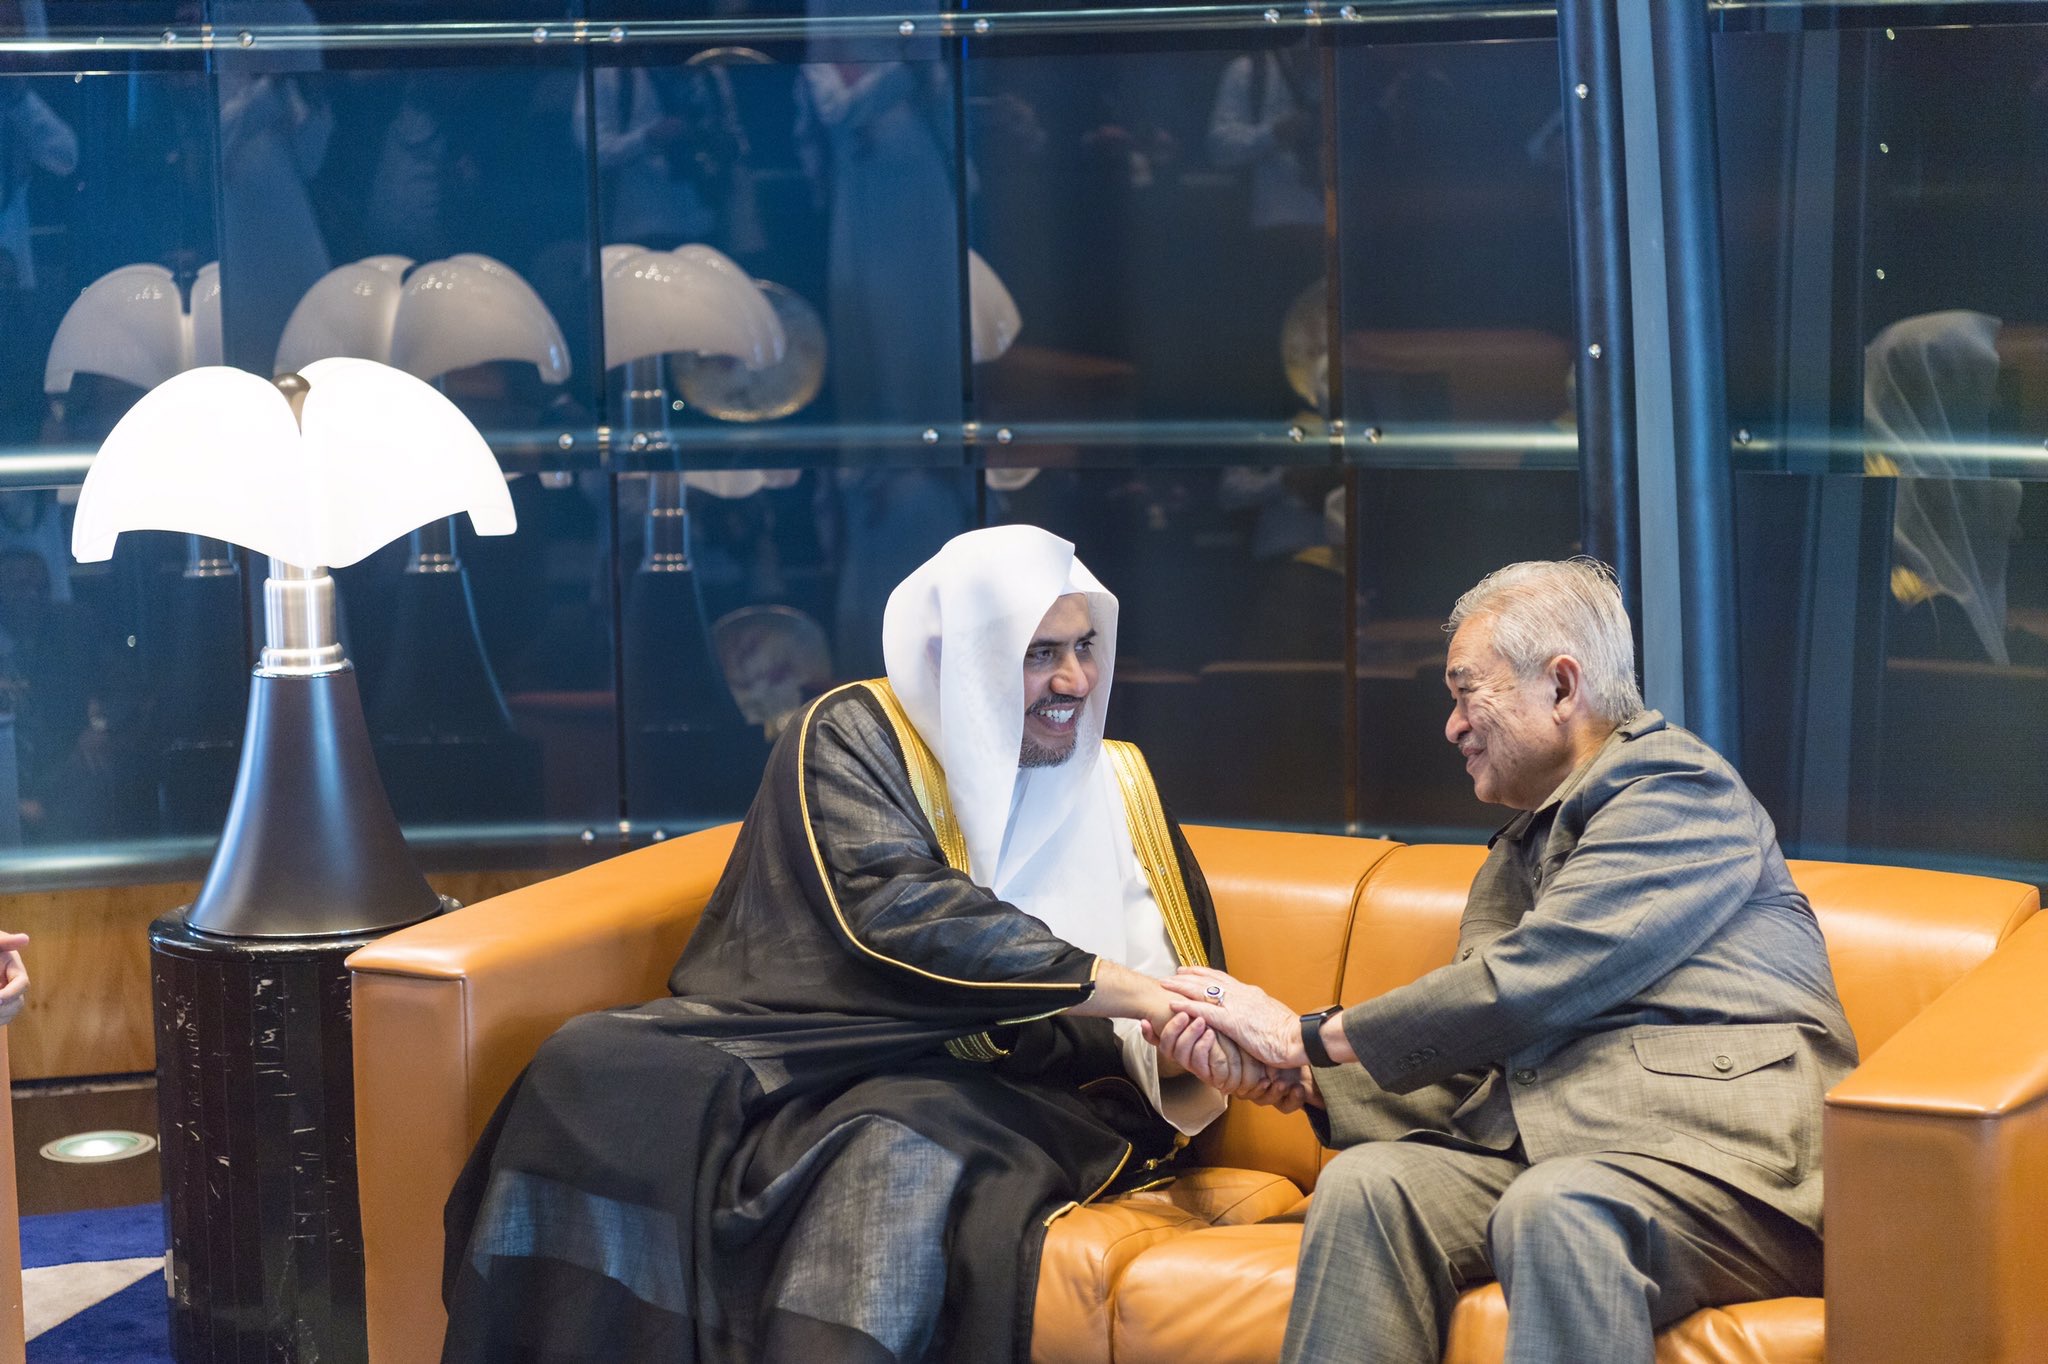 During his visit to Malaysia, HE the SG meets Dr. Abdullah Badawi, former Malaysian Prime Minister.